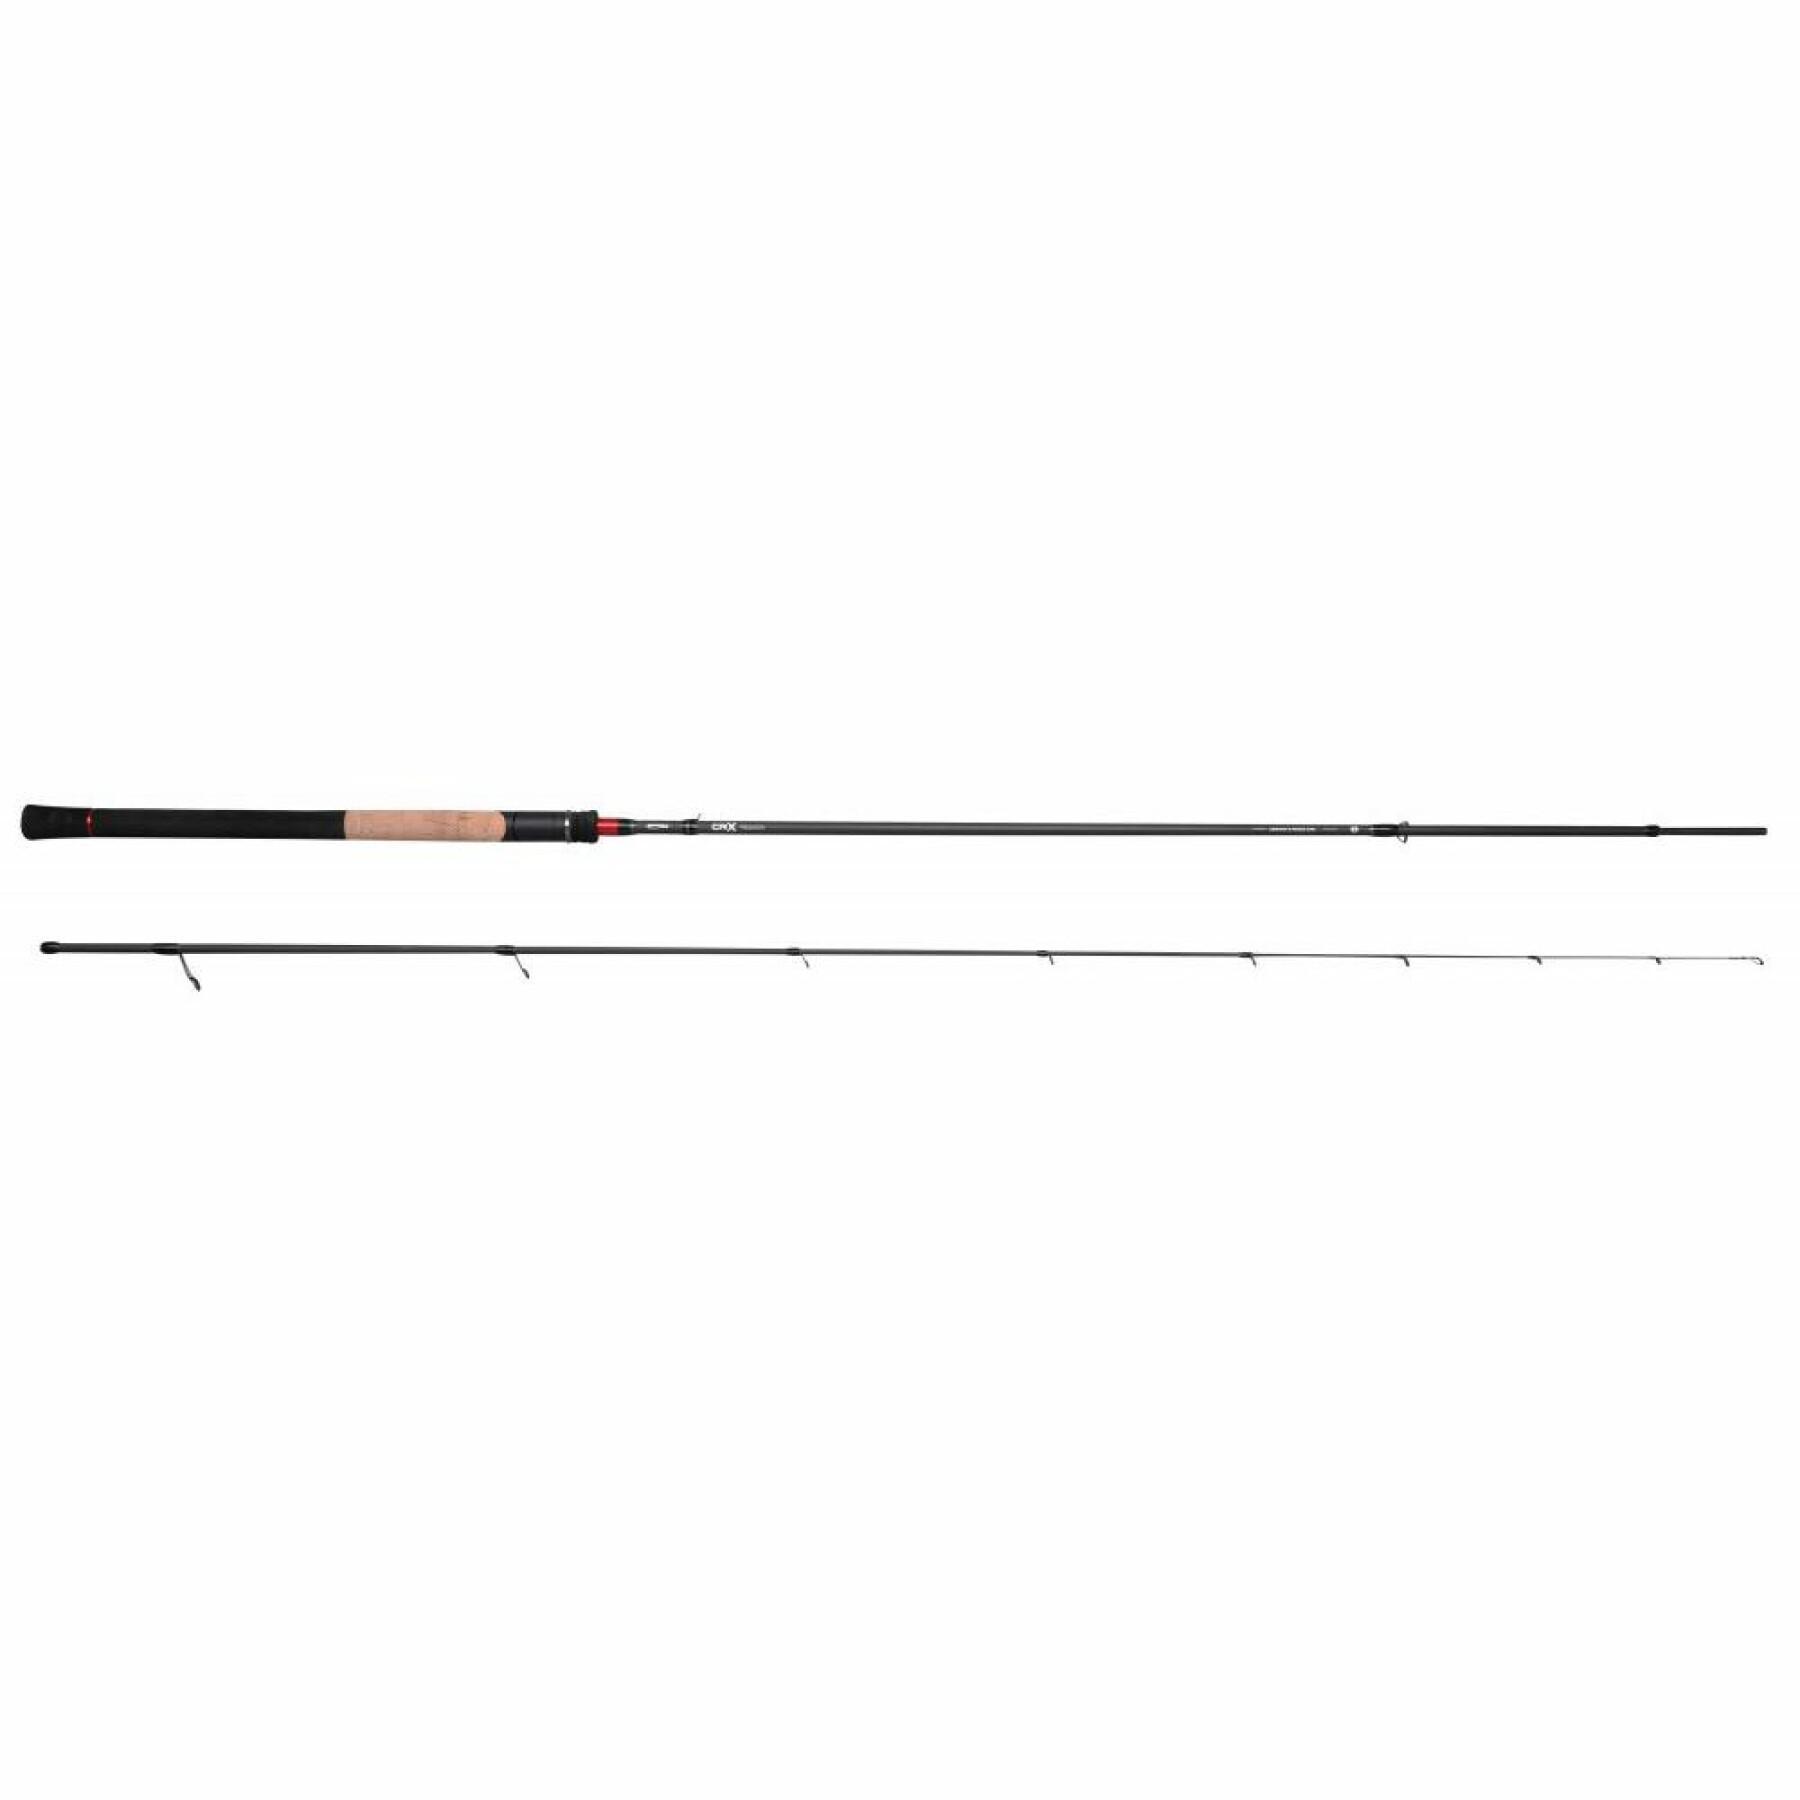 Spinning rod Spro Crx Dropshot & Finesse 5-24g